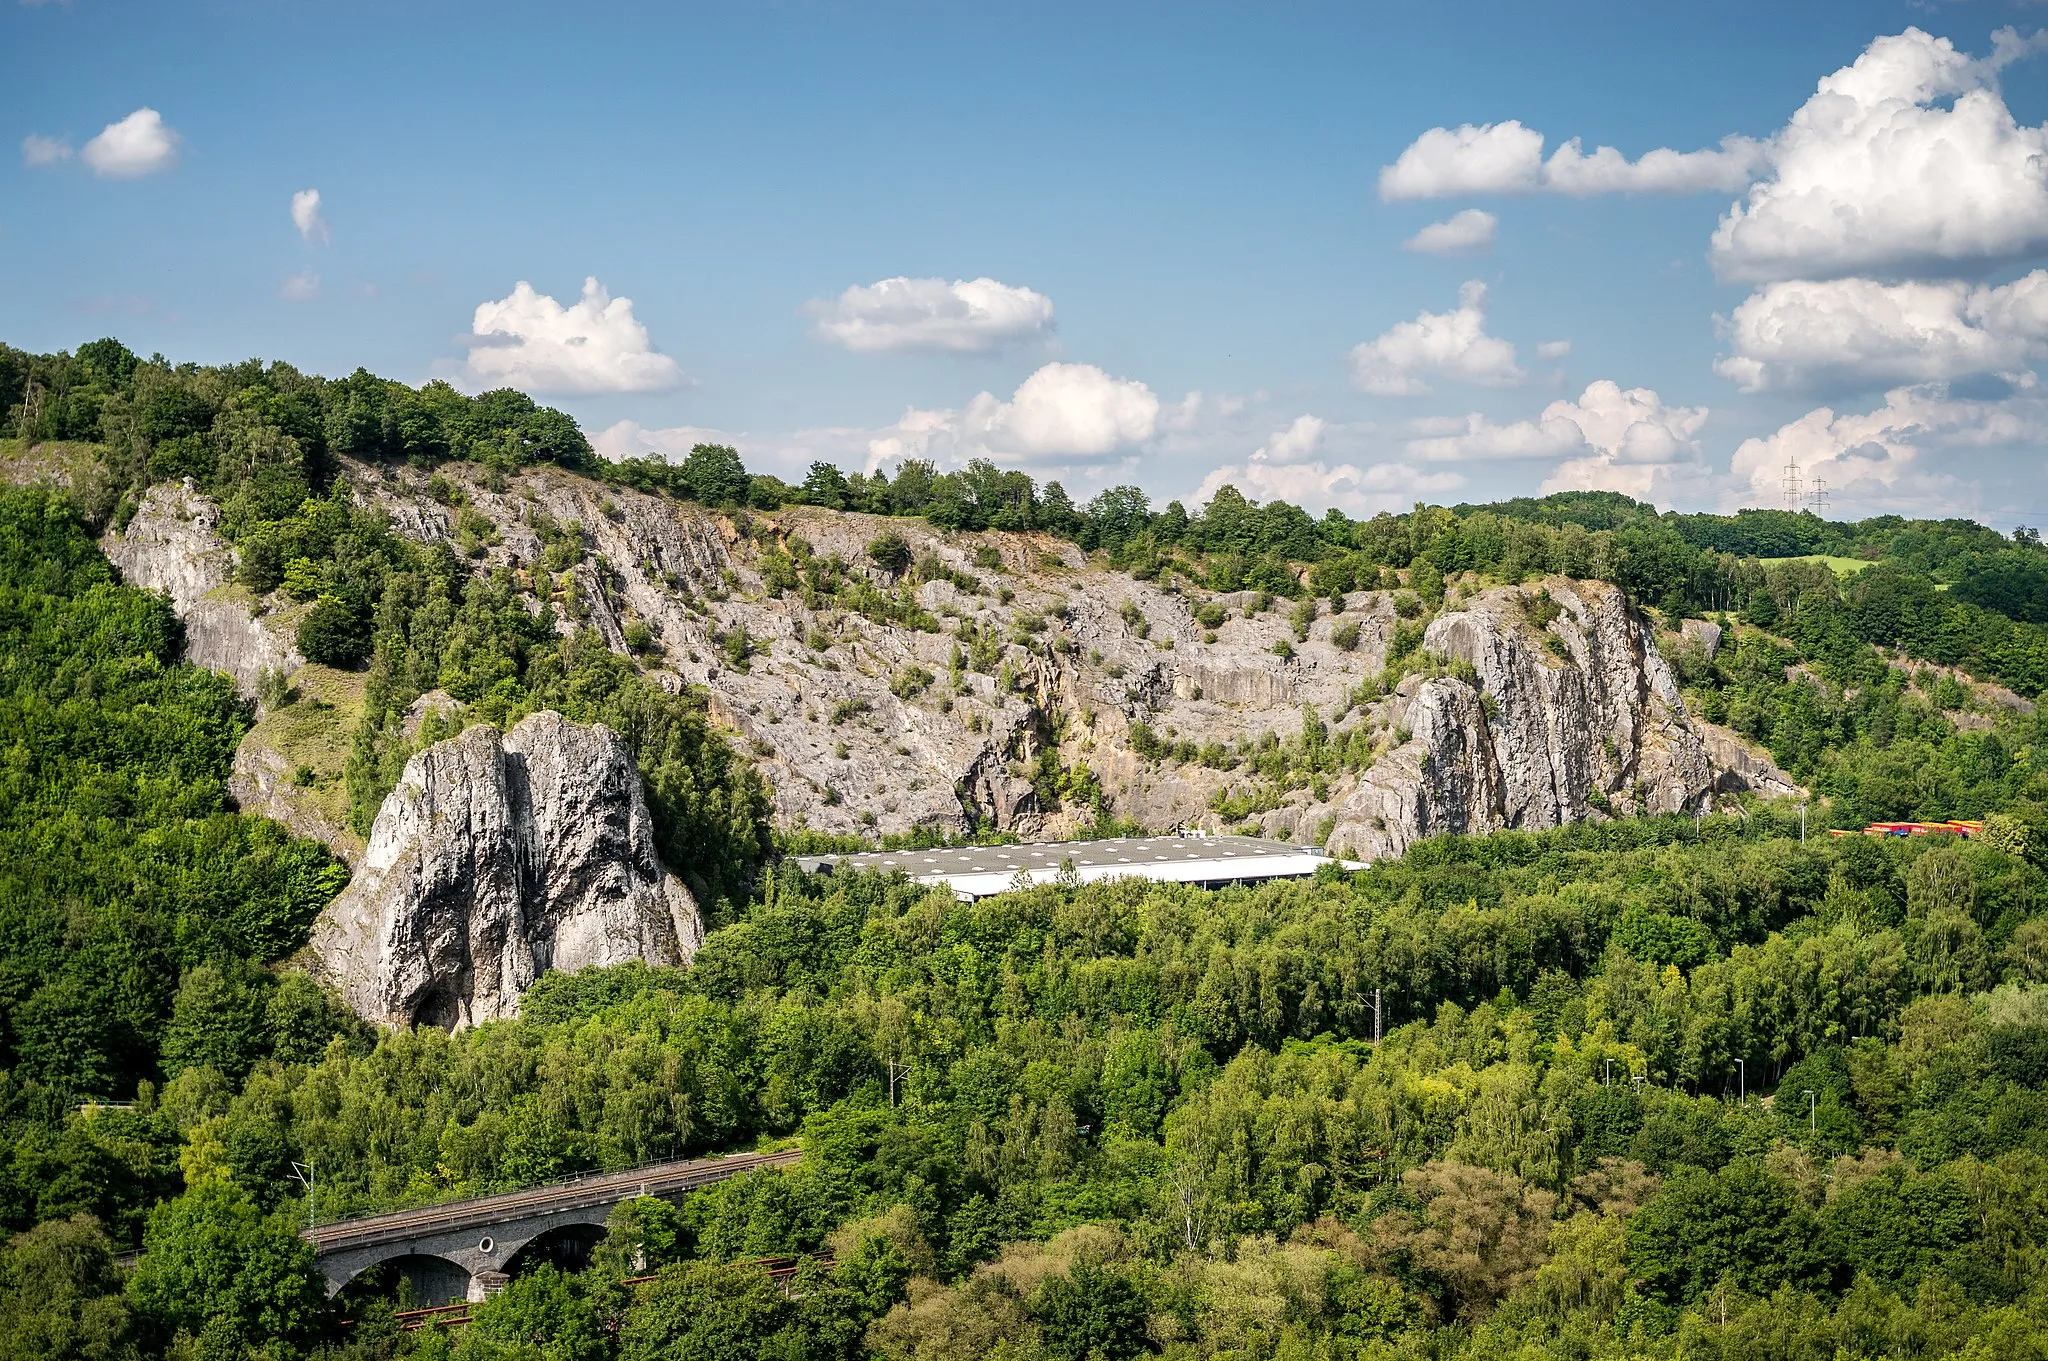 Photo showing: The southern flank of nature reserve Burgberg with its distinctive rock formation consisting of devonian compact limestone. On the left you can see the rock-natural monument "Pater und Nonne", which consists of two approximately 60m high rock towers. On its right side, you can see a part of the storage location of the shipping company Winner.